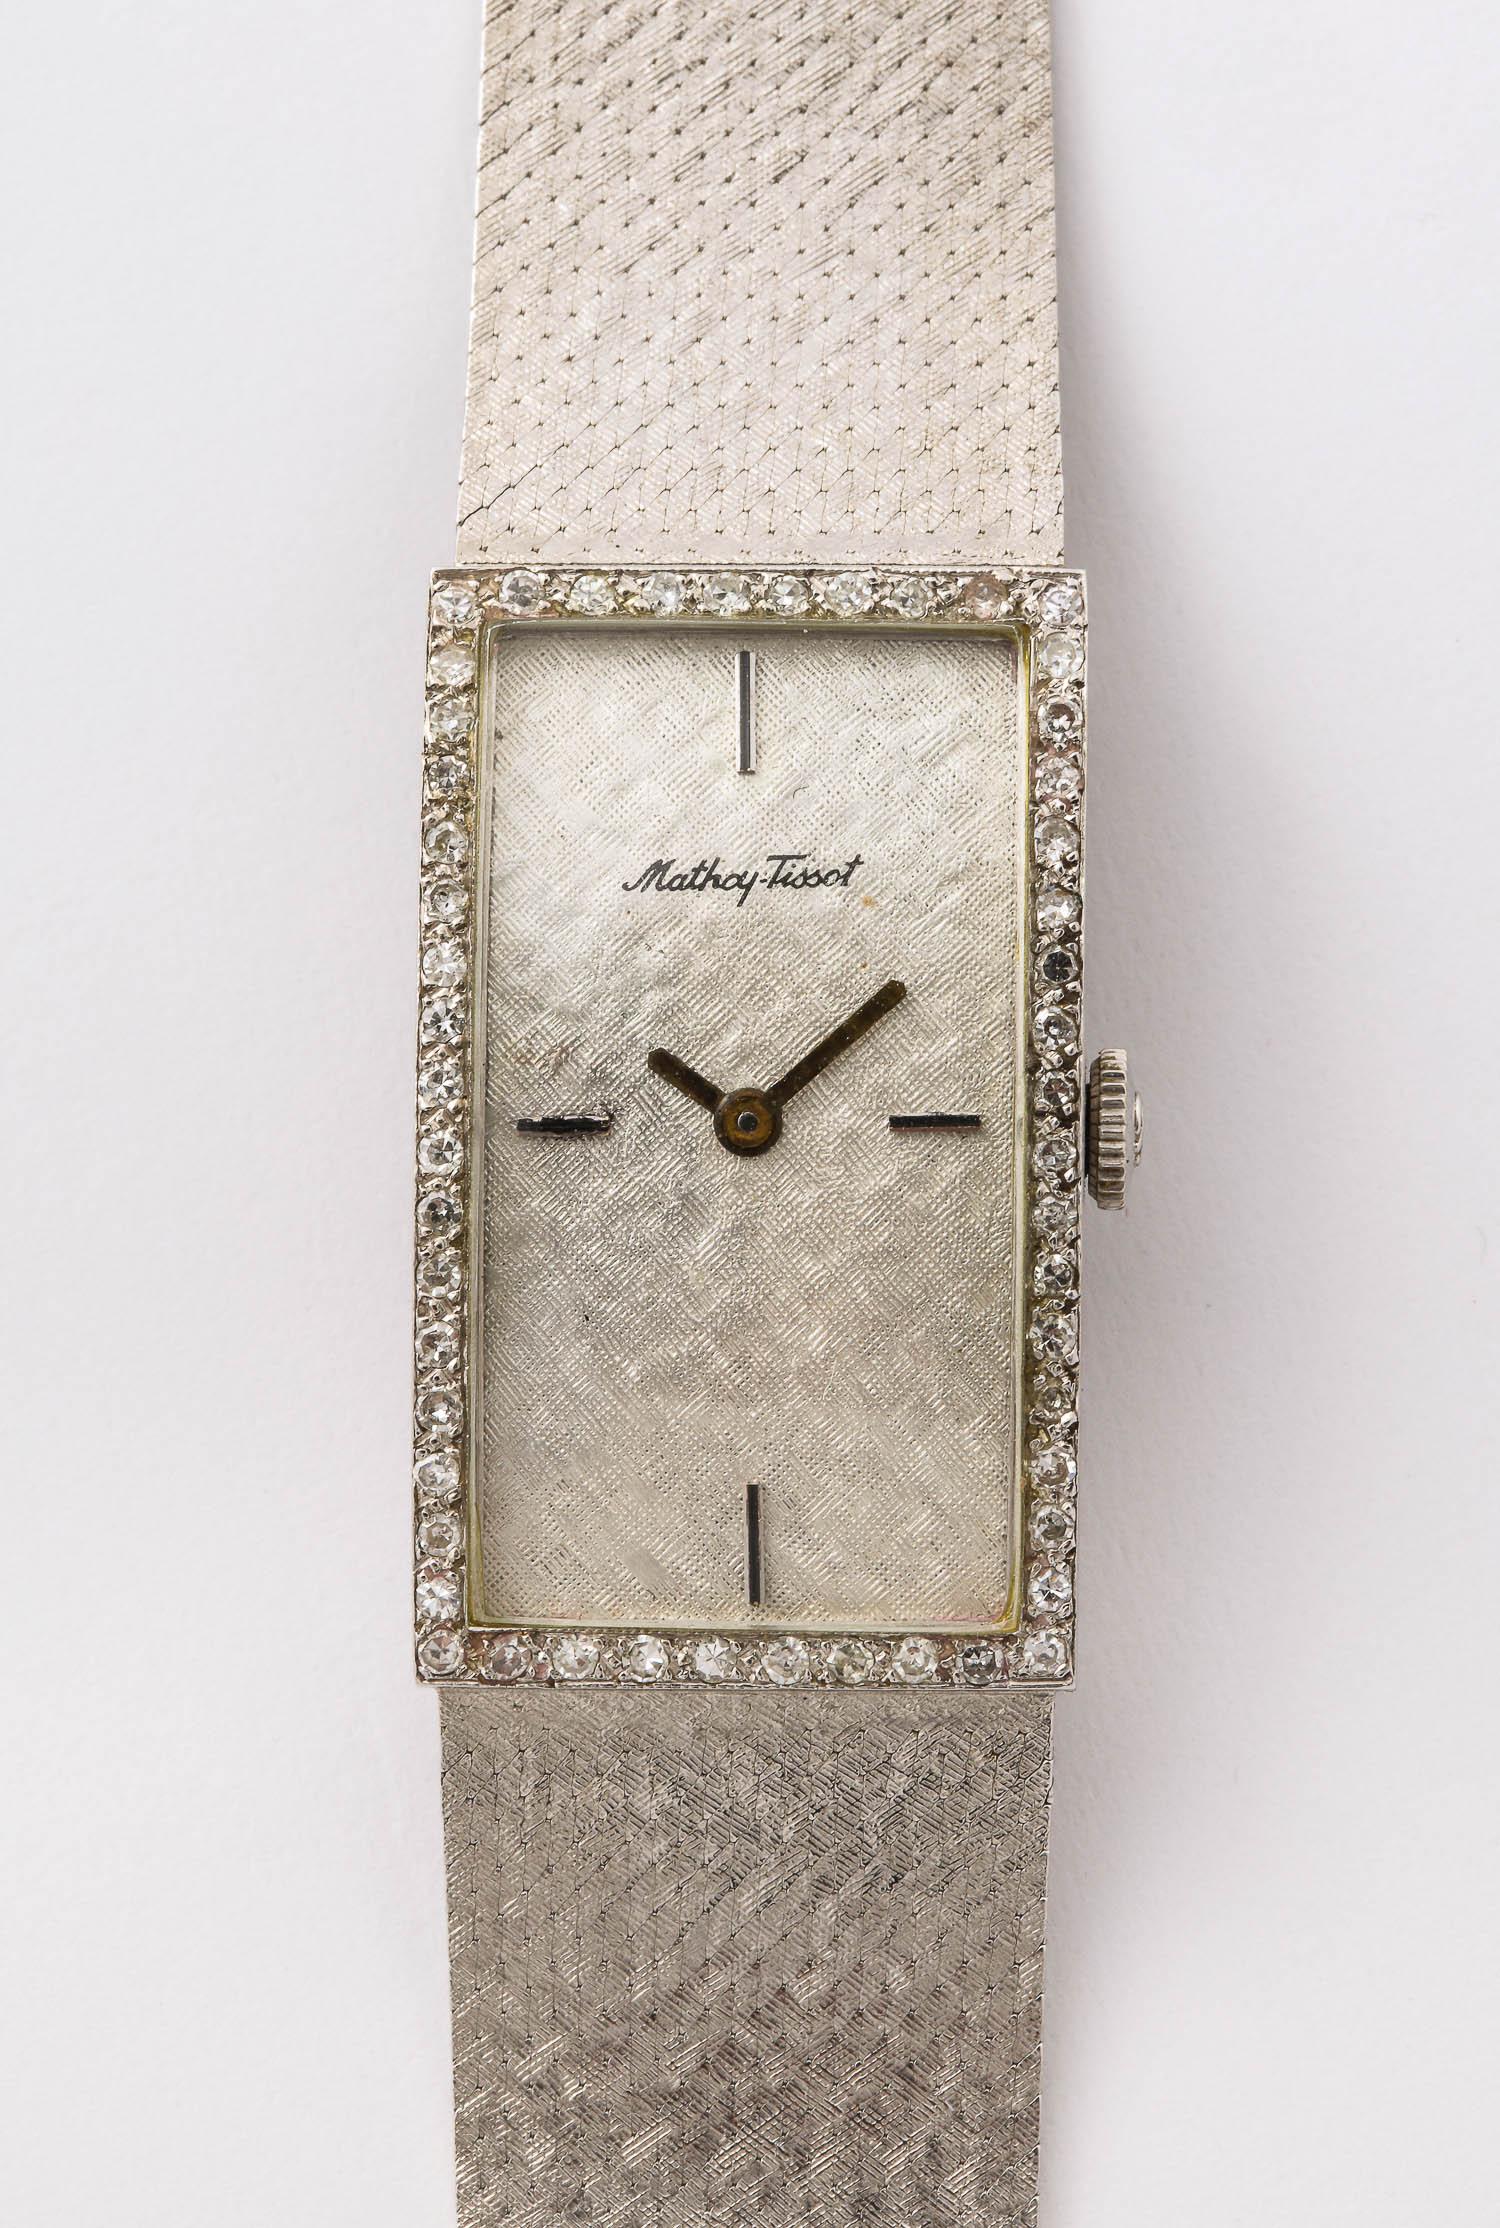 Mathey-Tissot 14k White Gold and Diamond Ladies Wide Bracelet Watch.  It is vintage but looks like it was manufactured today. When you want a gold and diamond watch this is a great choice.  Of course, it is suitable for everyday wear as well.

You